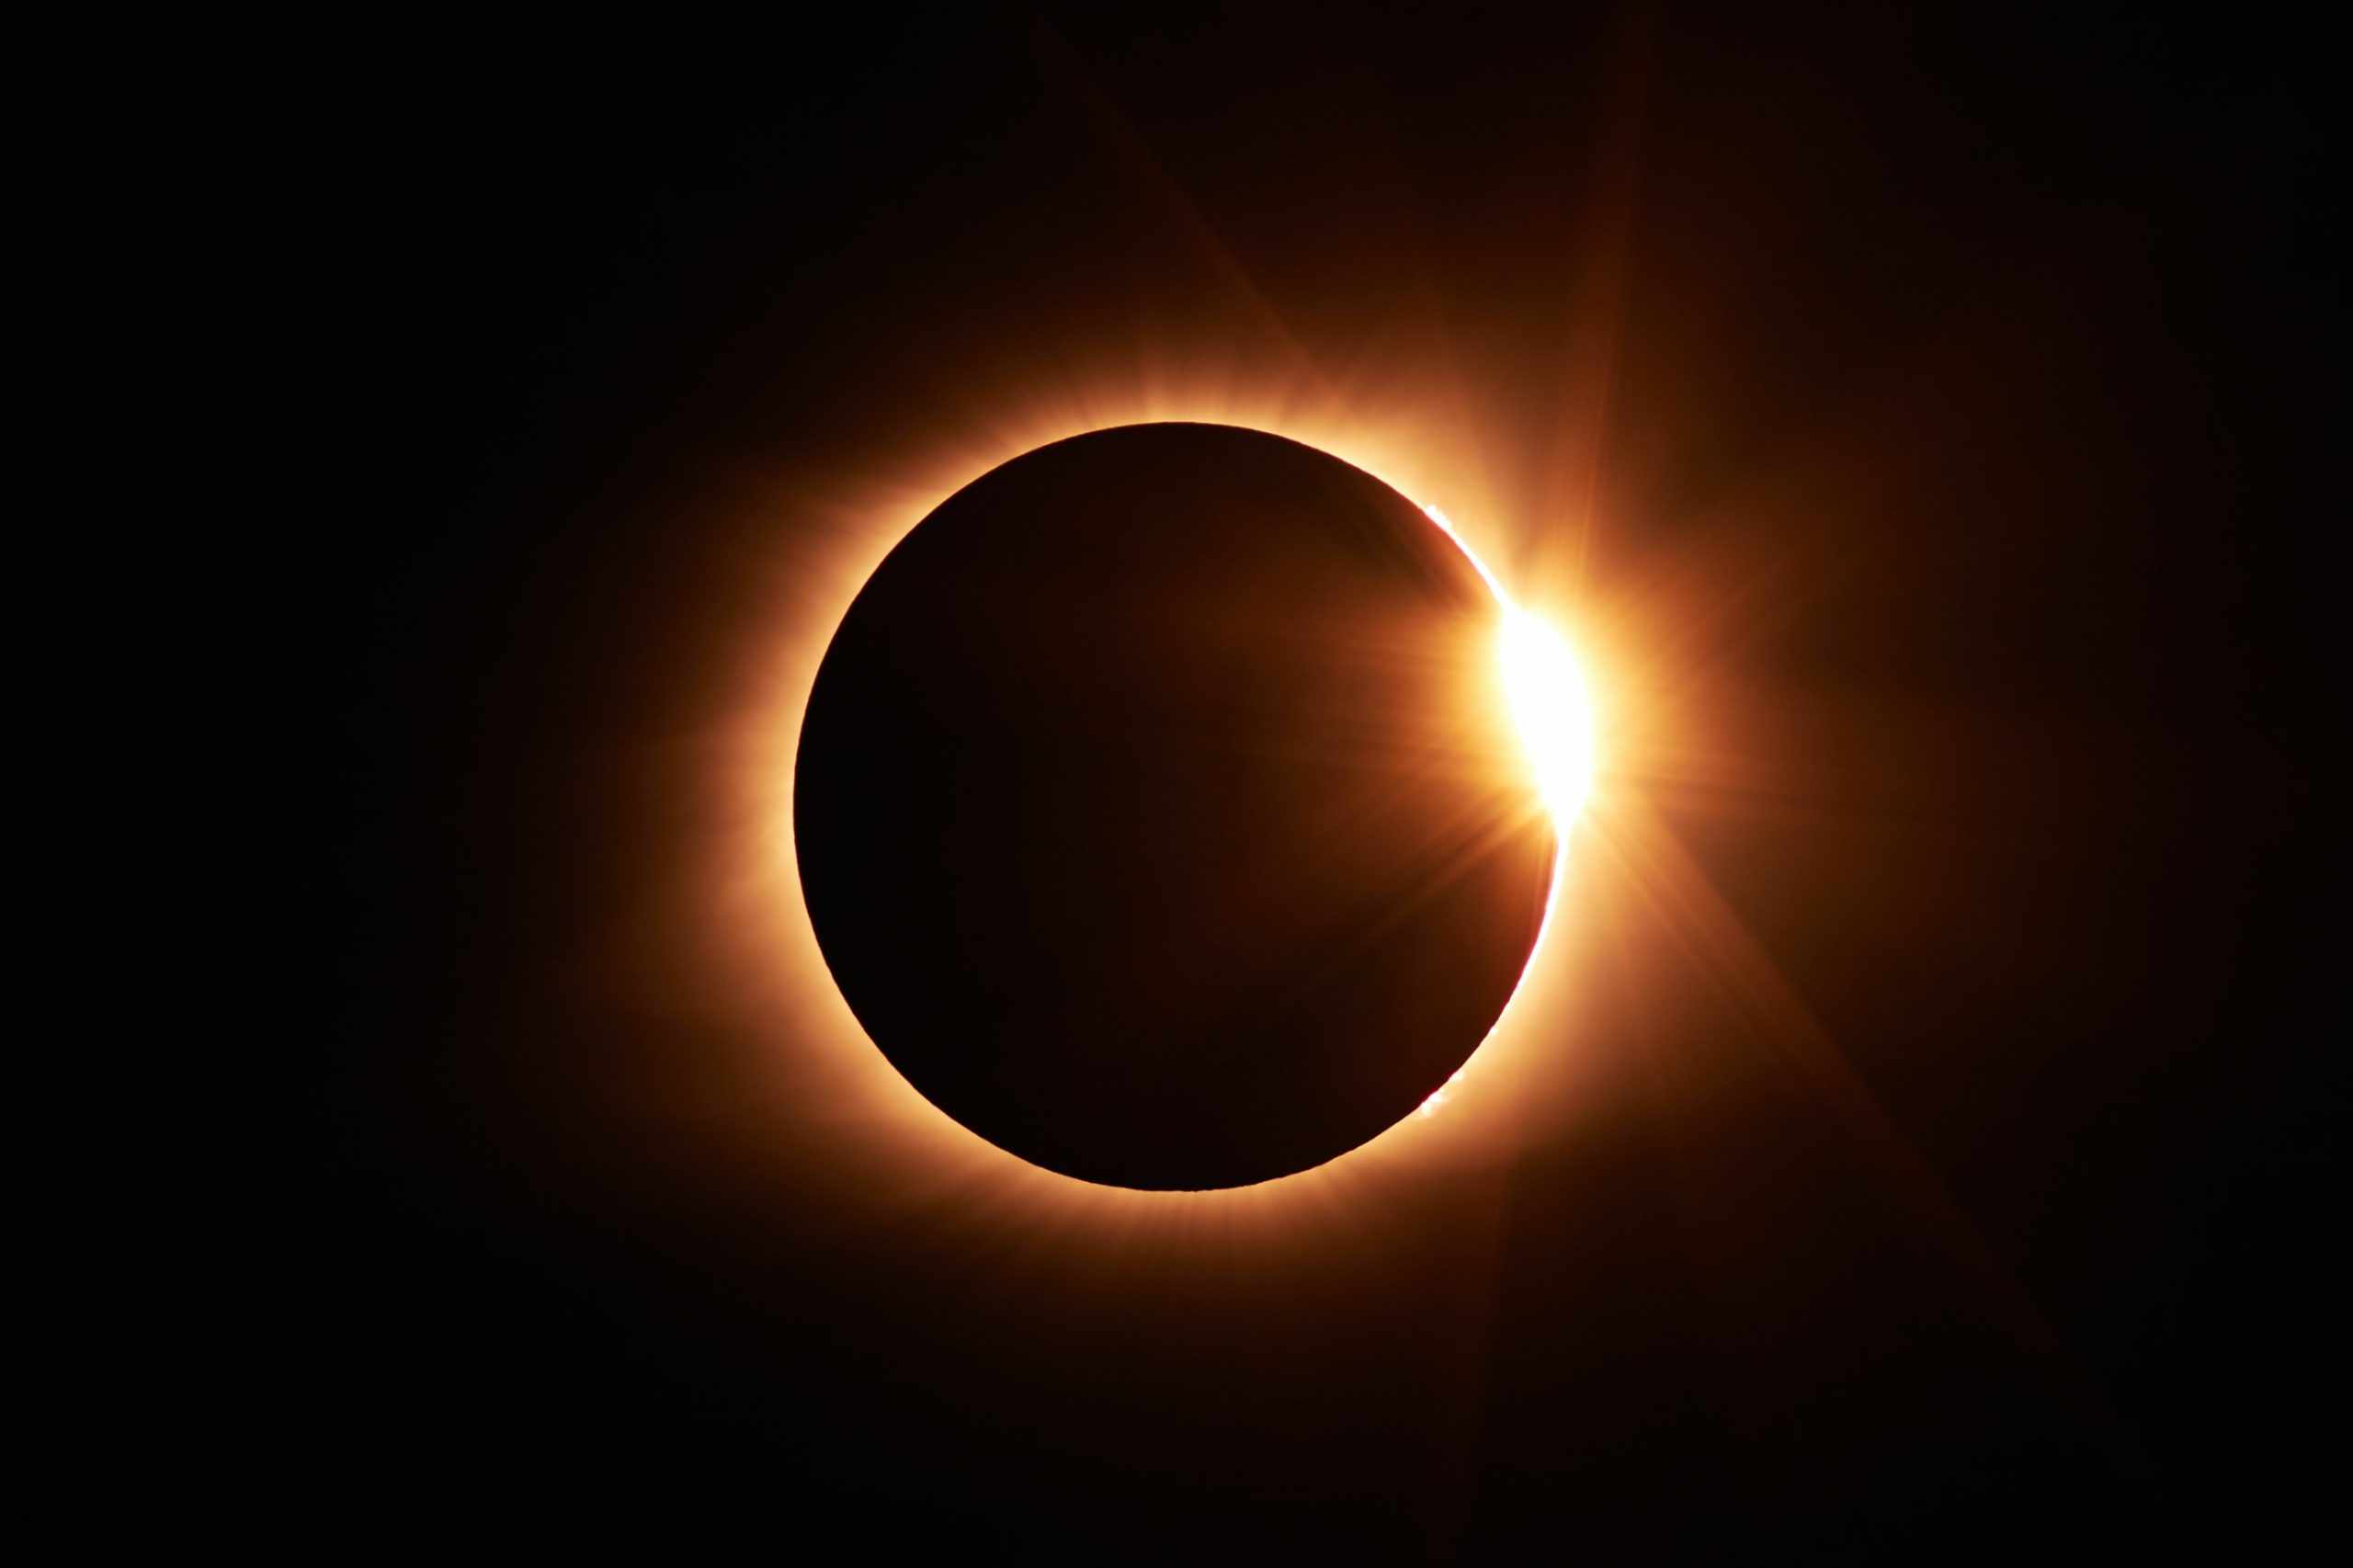 Why An RV Is The Best Way To See Solar Eclipse 2023